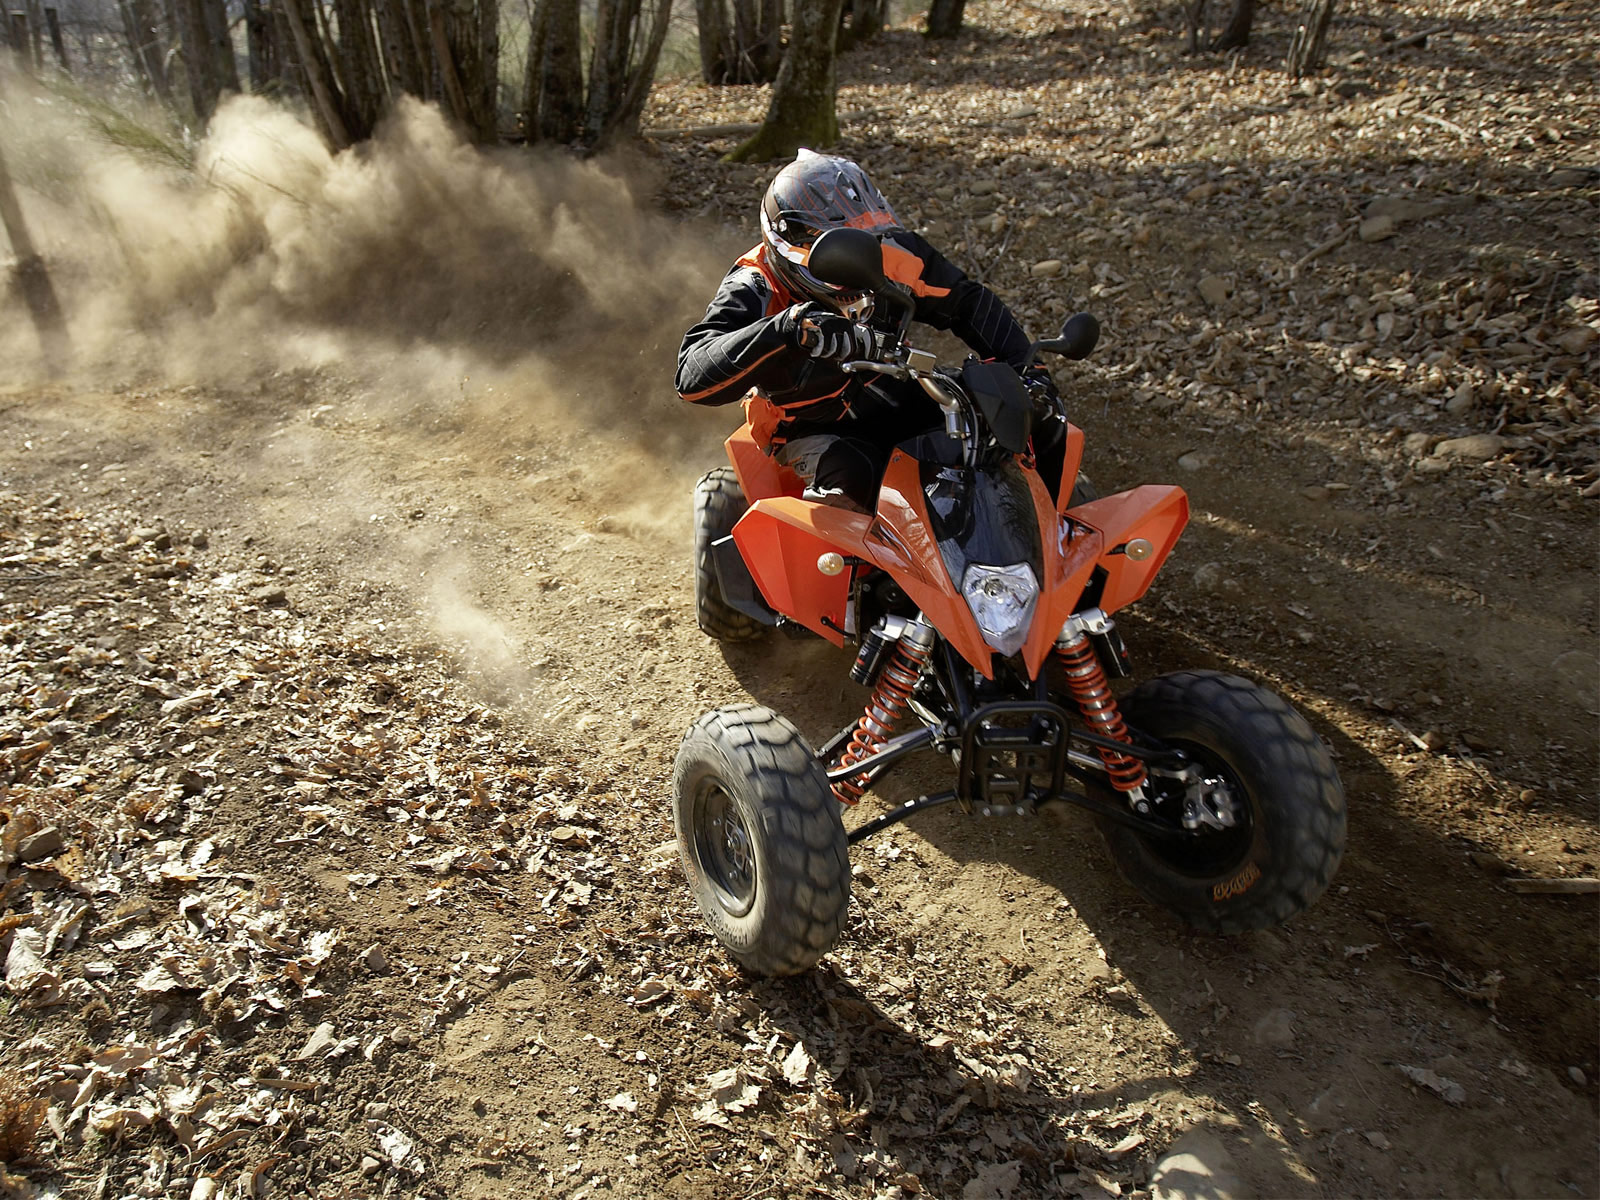 2010 KTM 525 XC ATV pictures and specifications